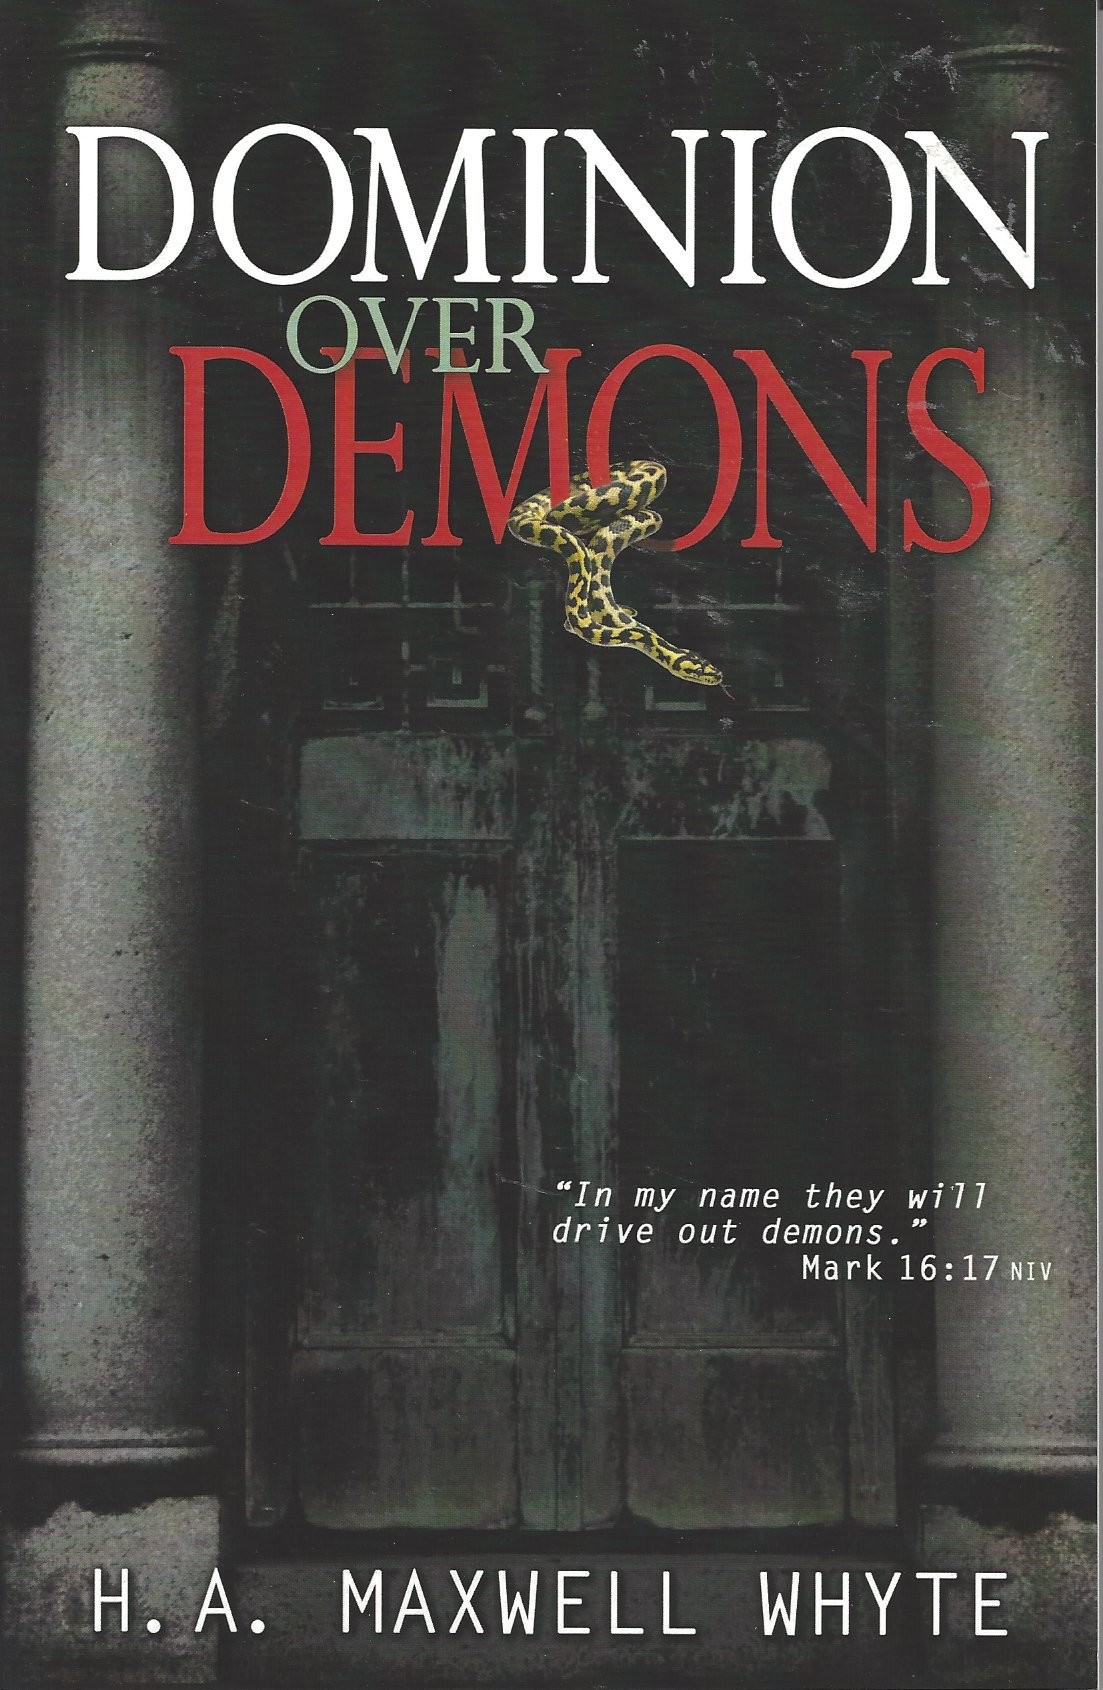 Dominion Over Demons  (1973)  Front